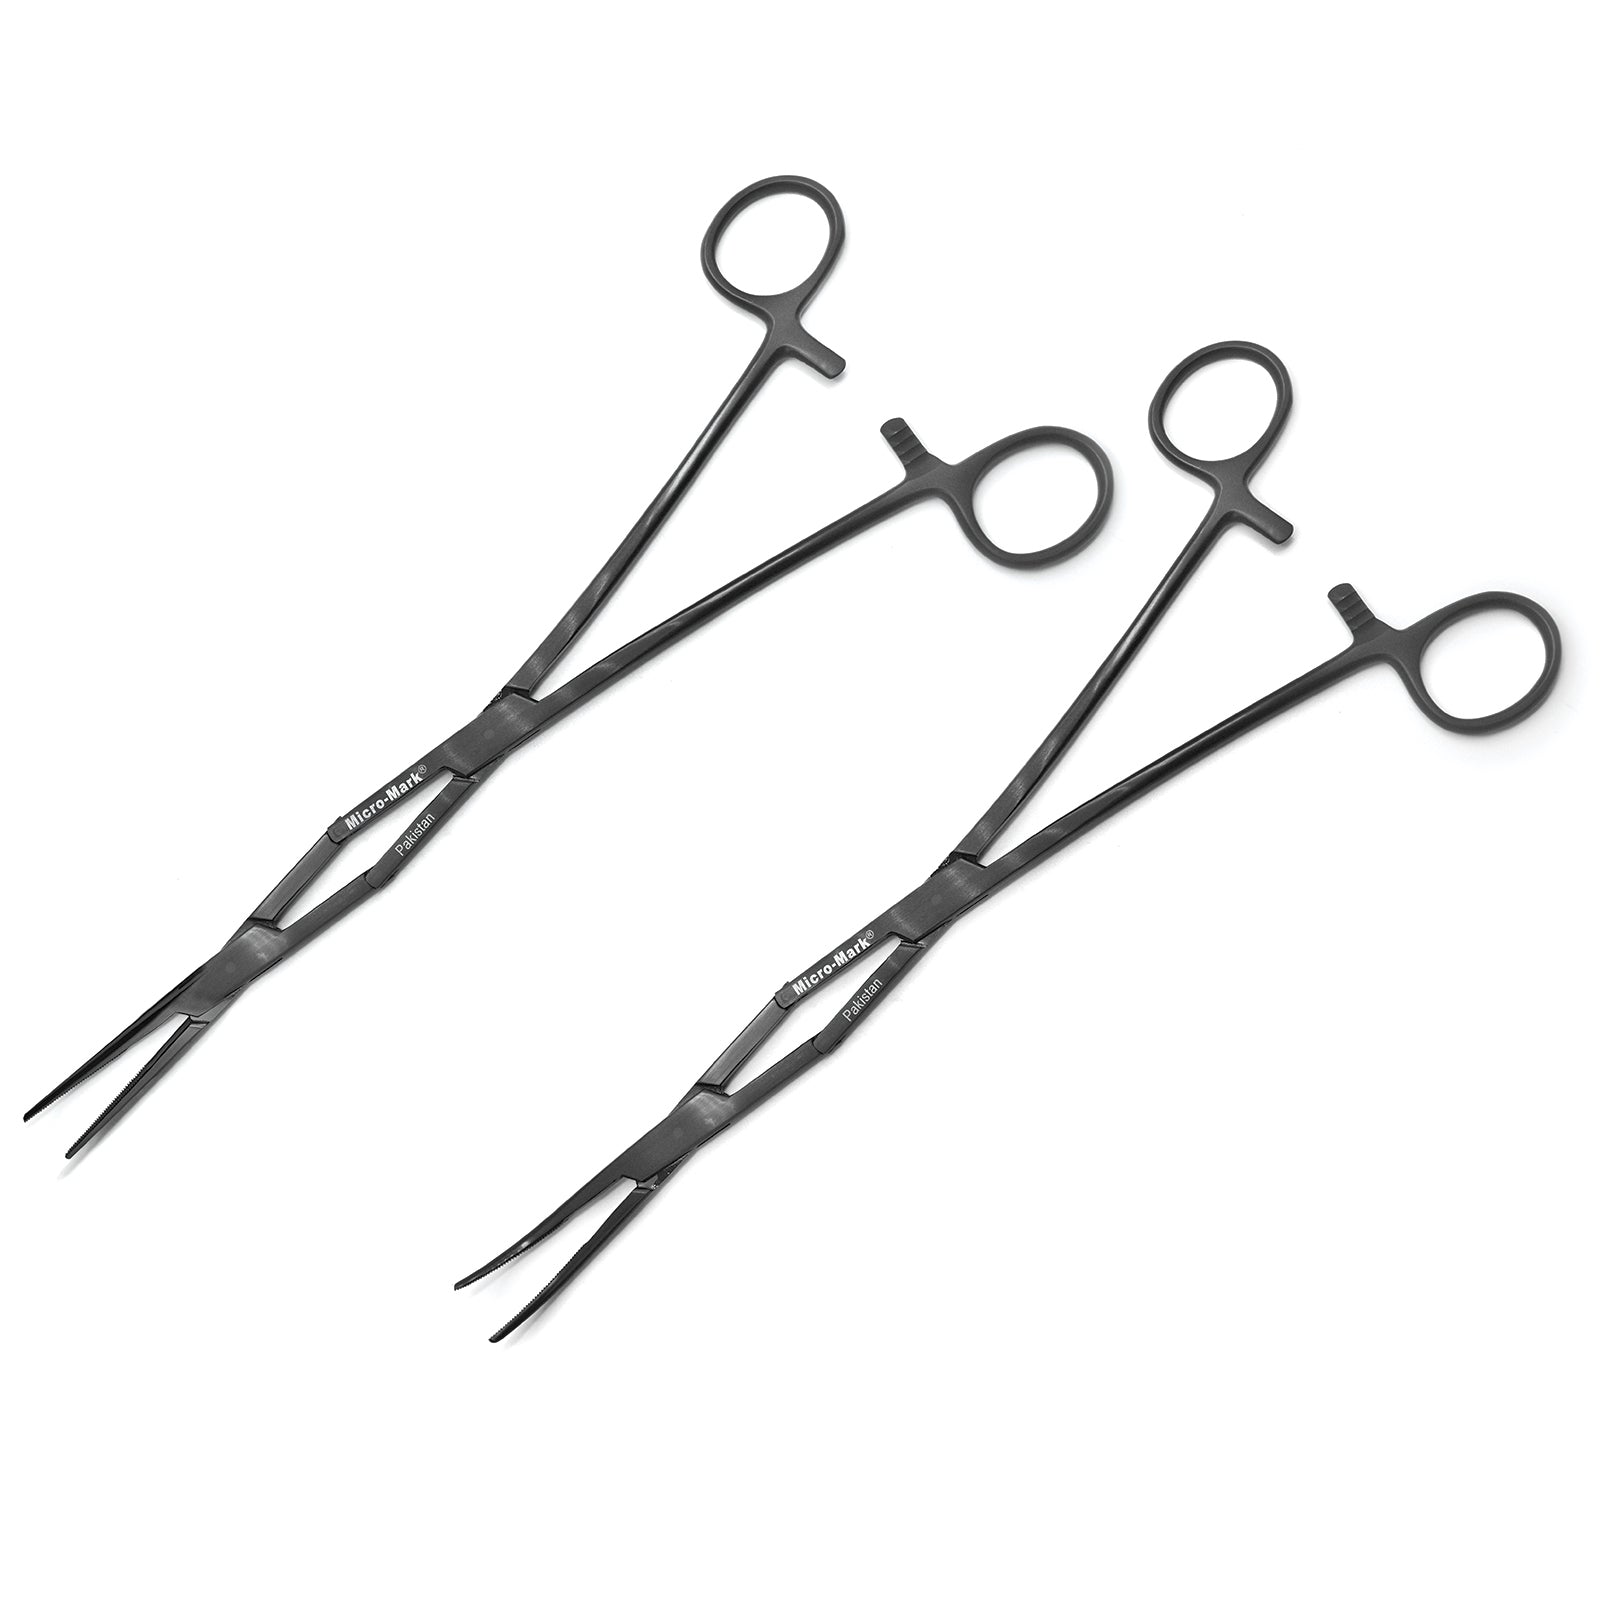 Double-Hinged Extended-Reach Hemostat Set (1 Each Straight Tip and 30-Degree Curved Tip)